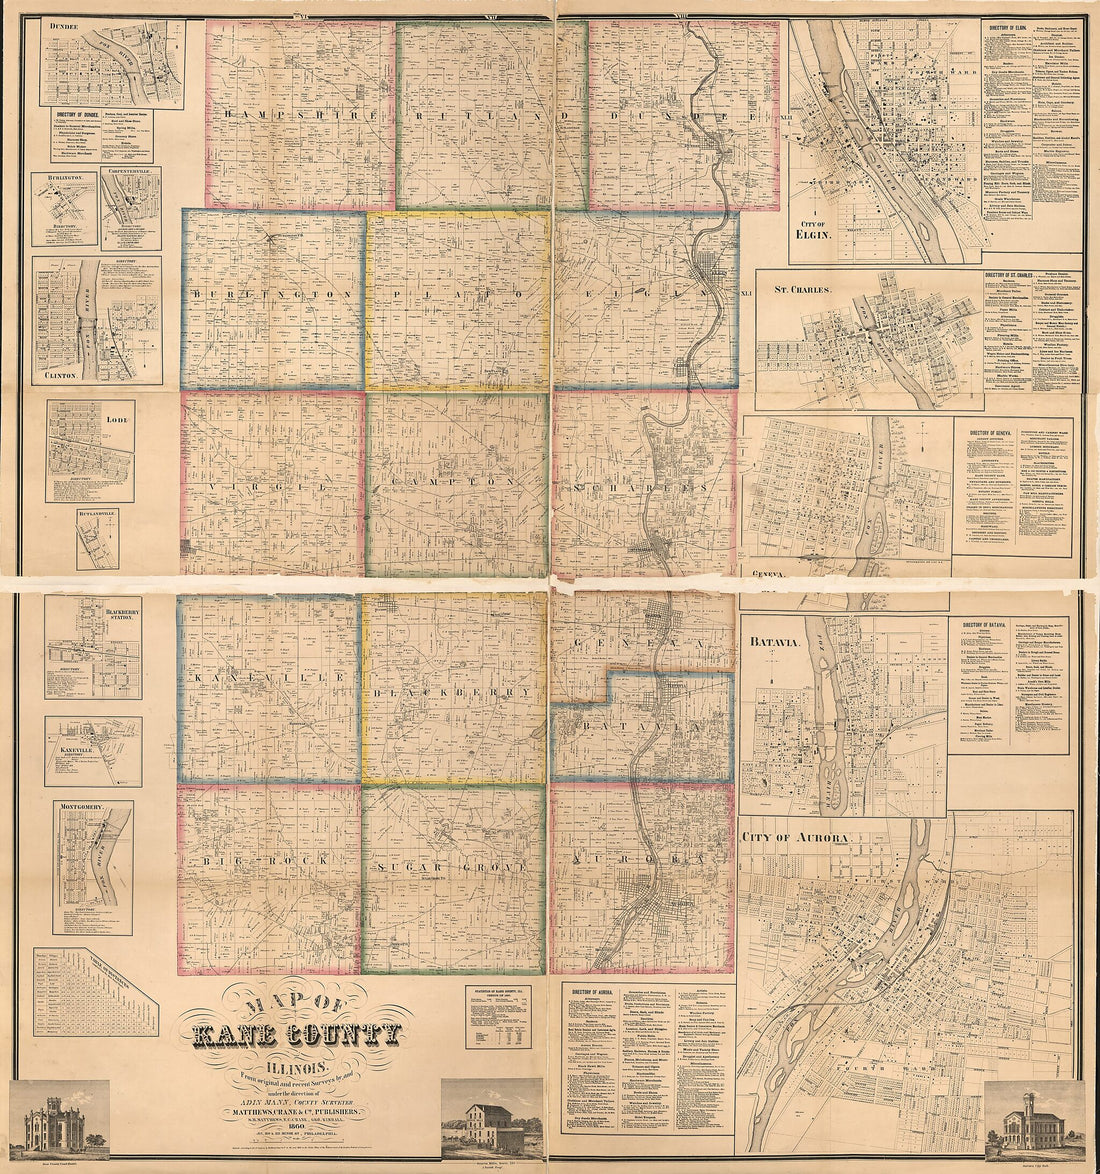 This old map of Map of Kane County, Illinois from 1860 was created by Adin Mann in 1860